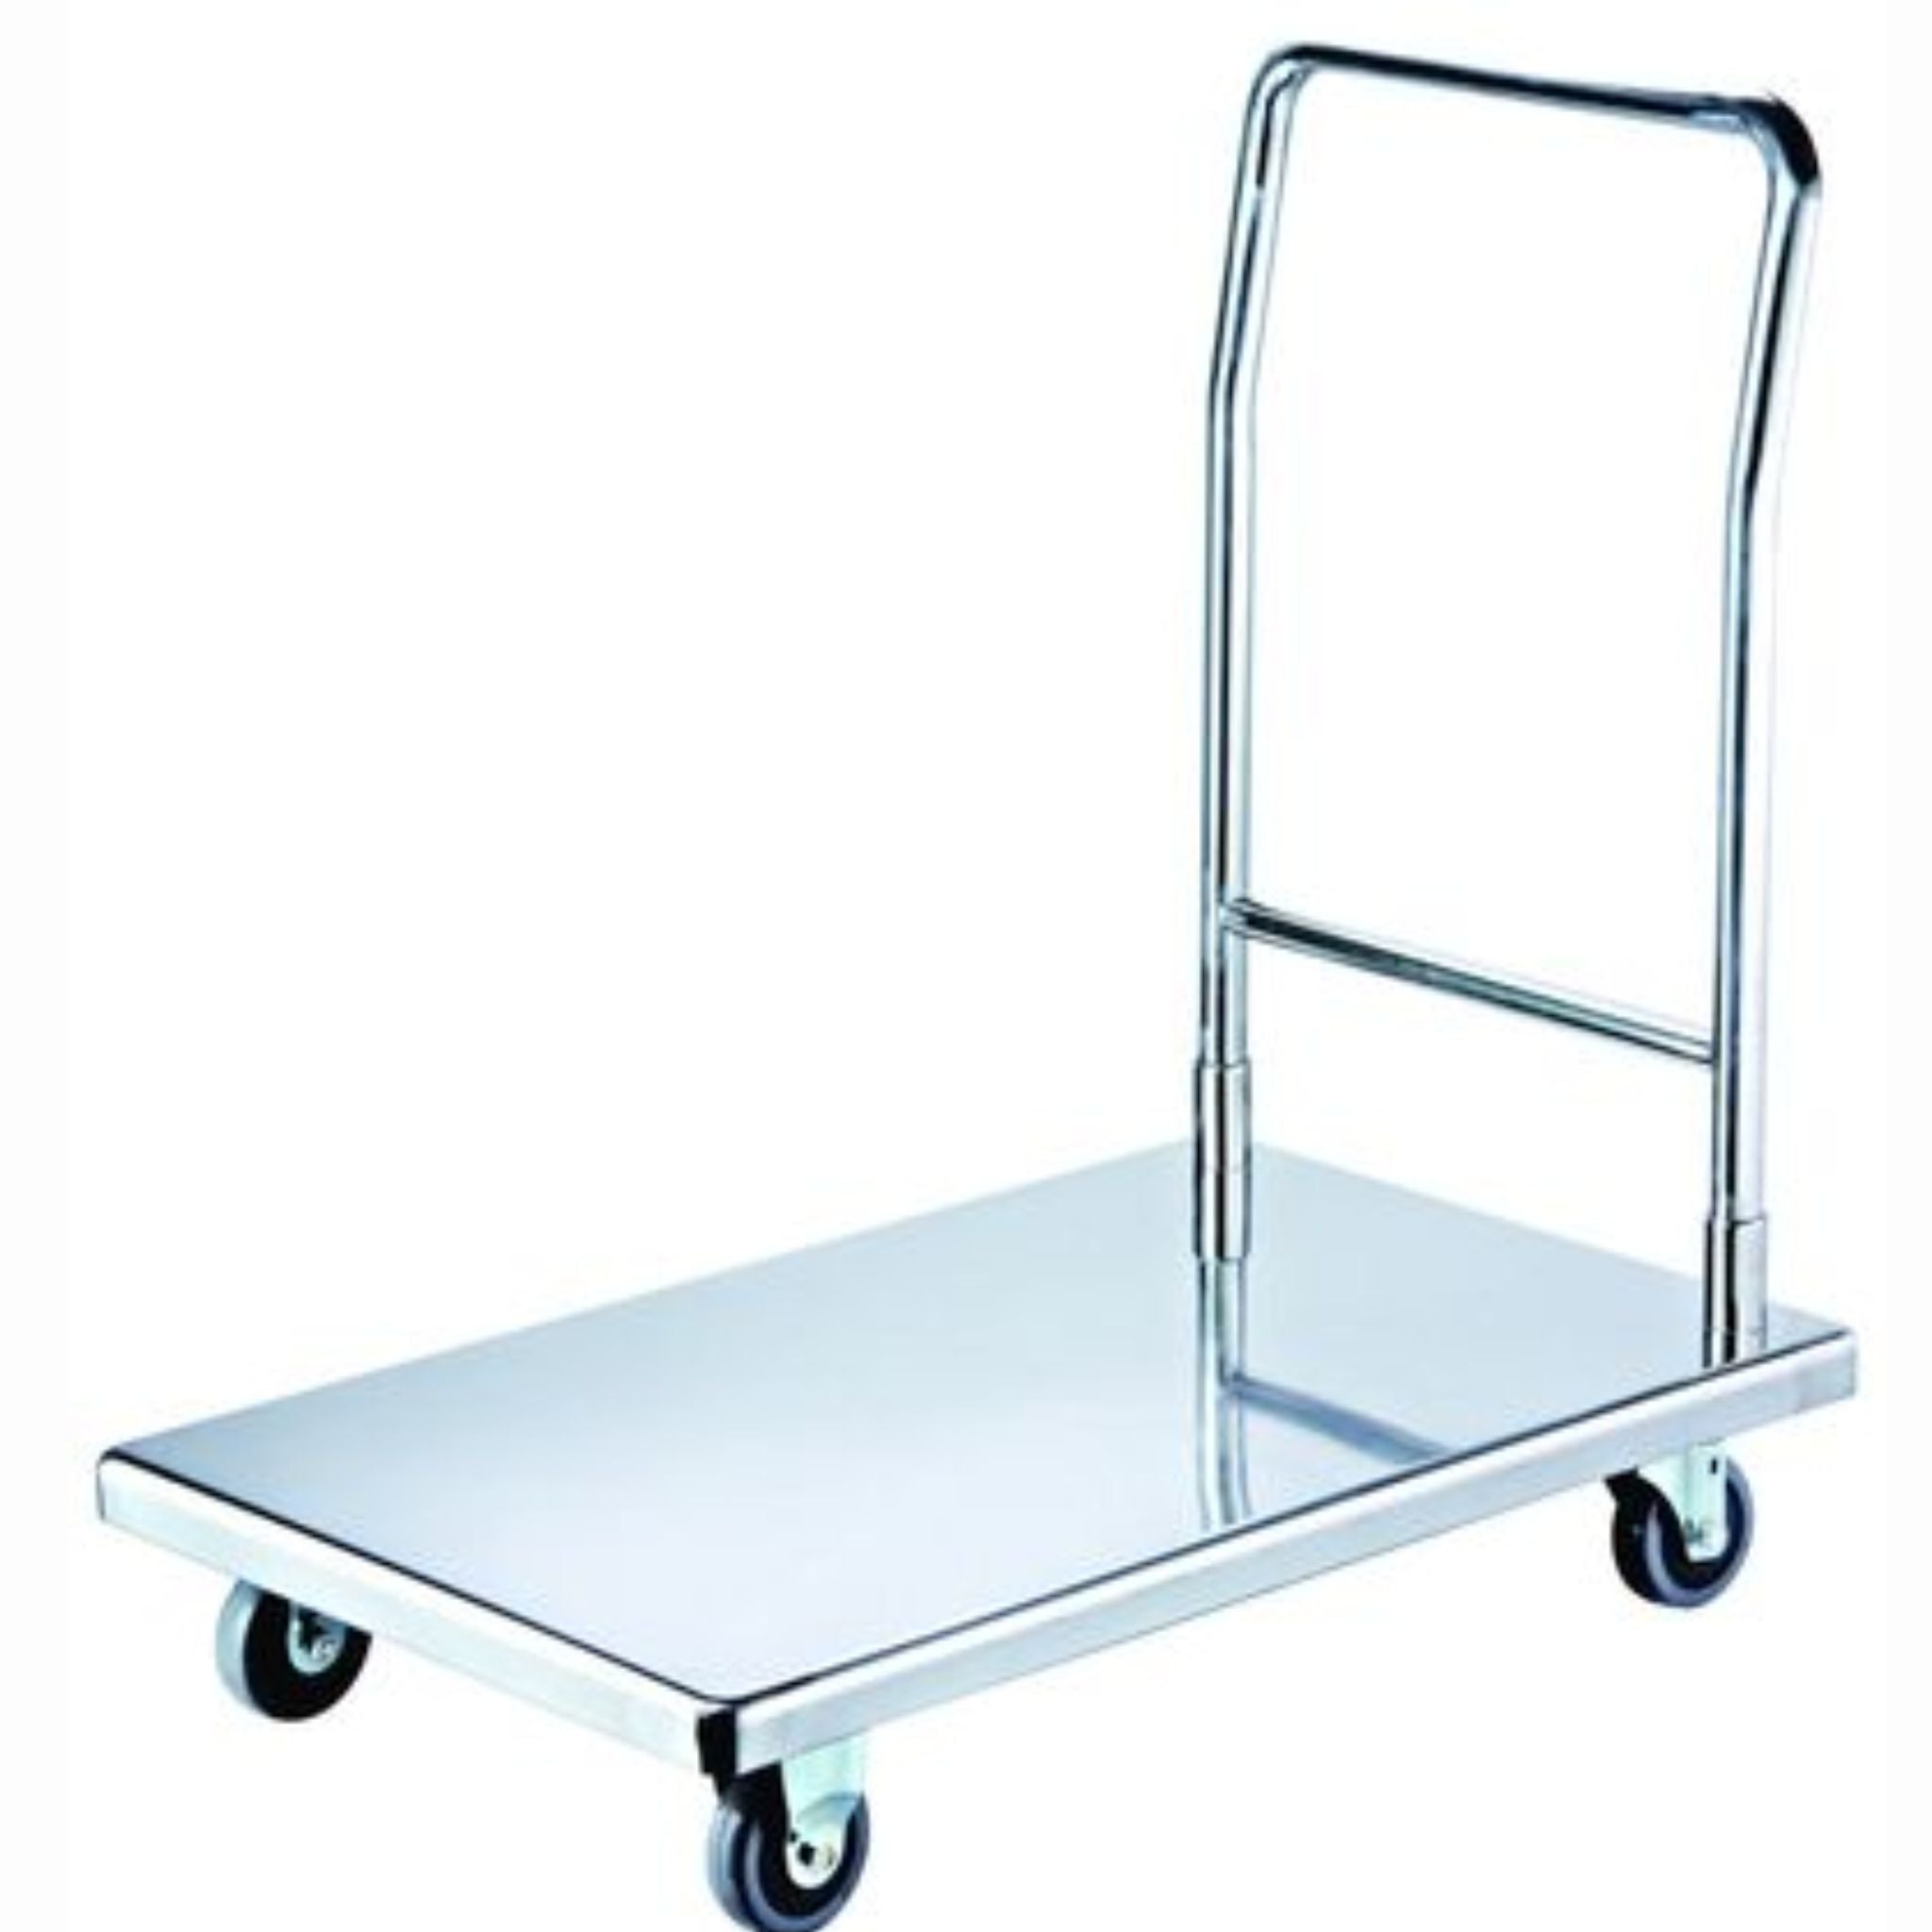 Stainless steel transport trolley